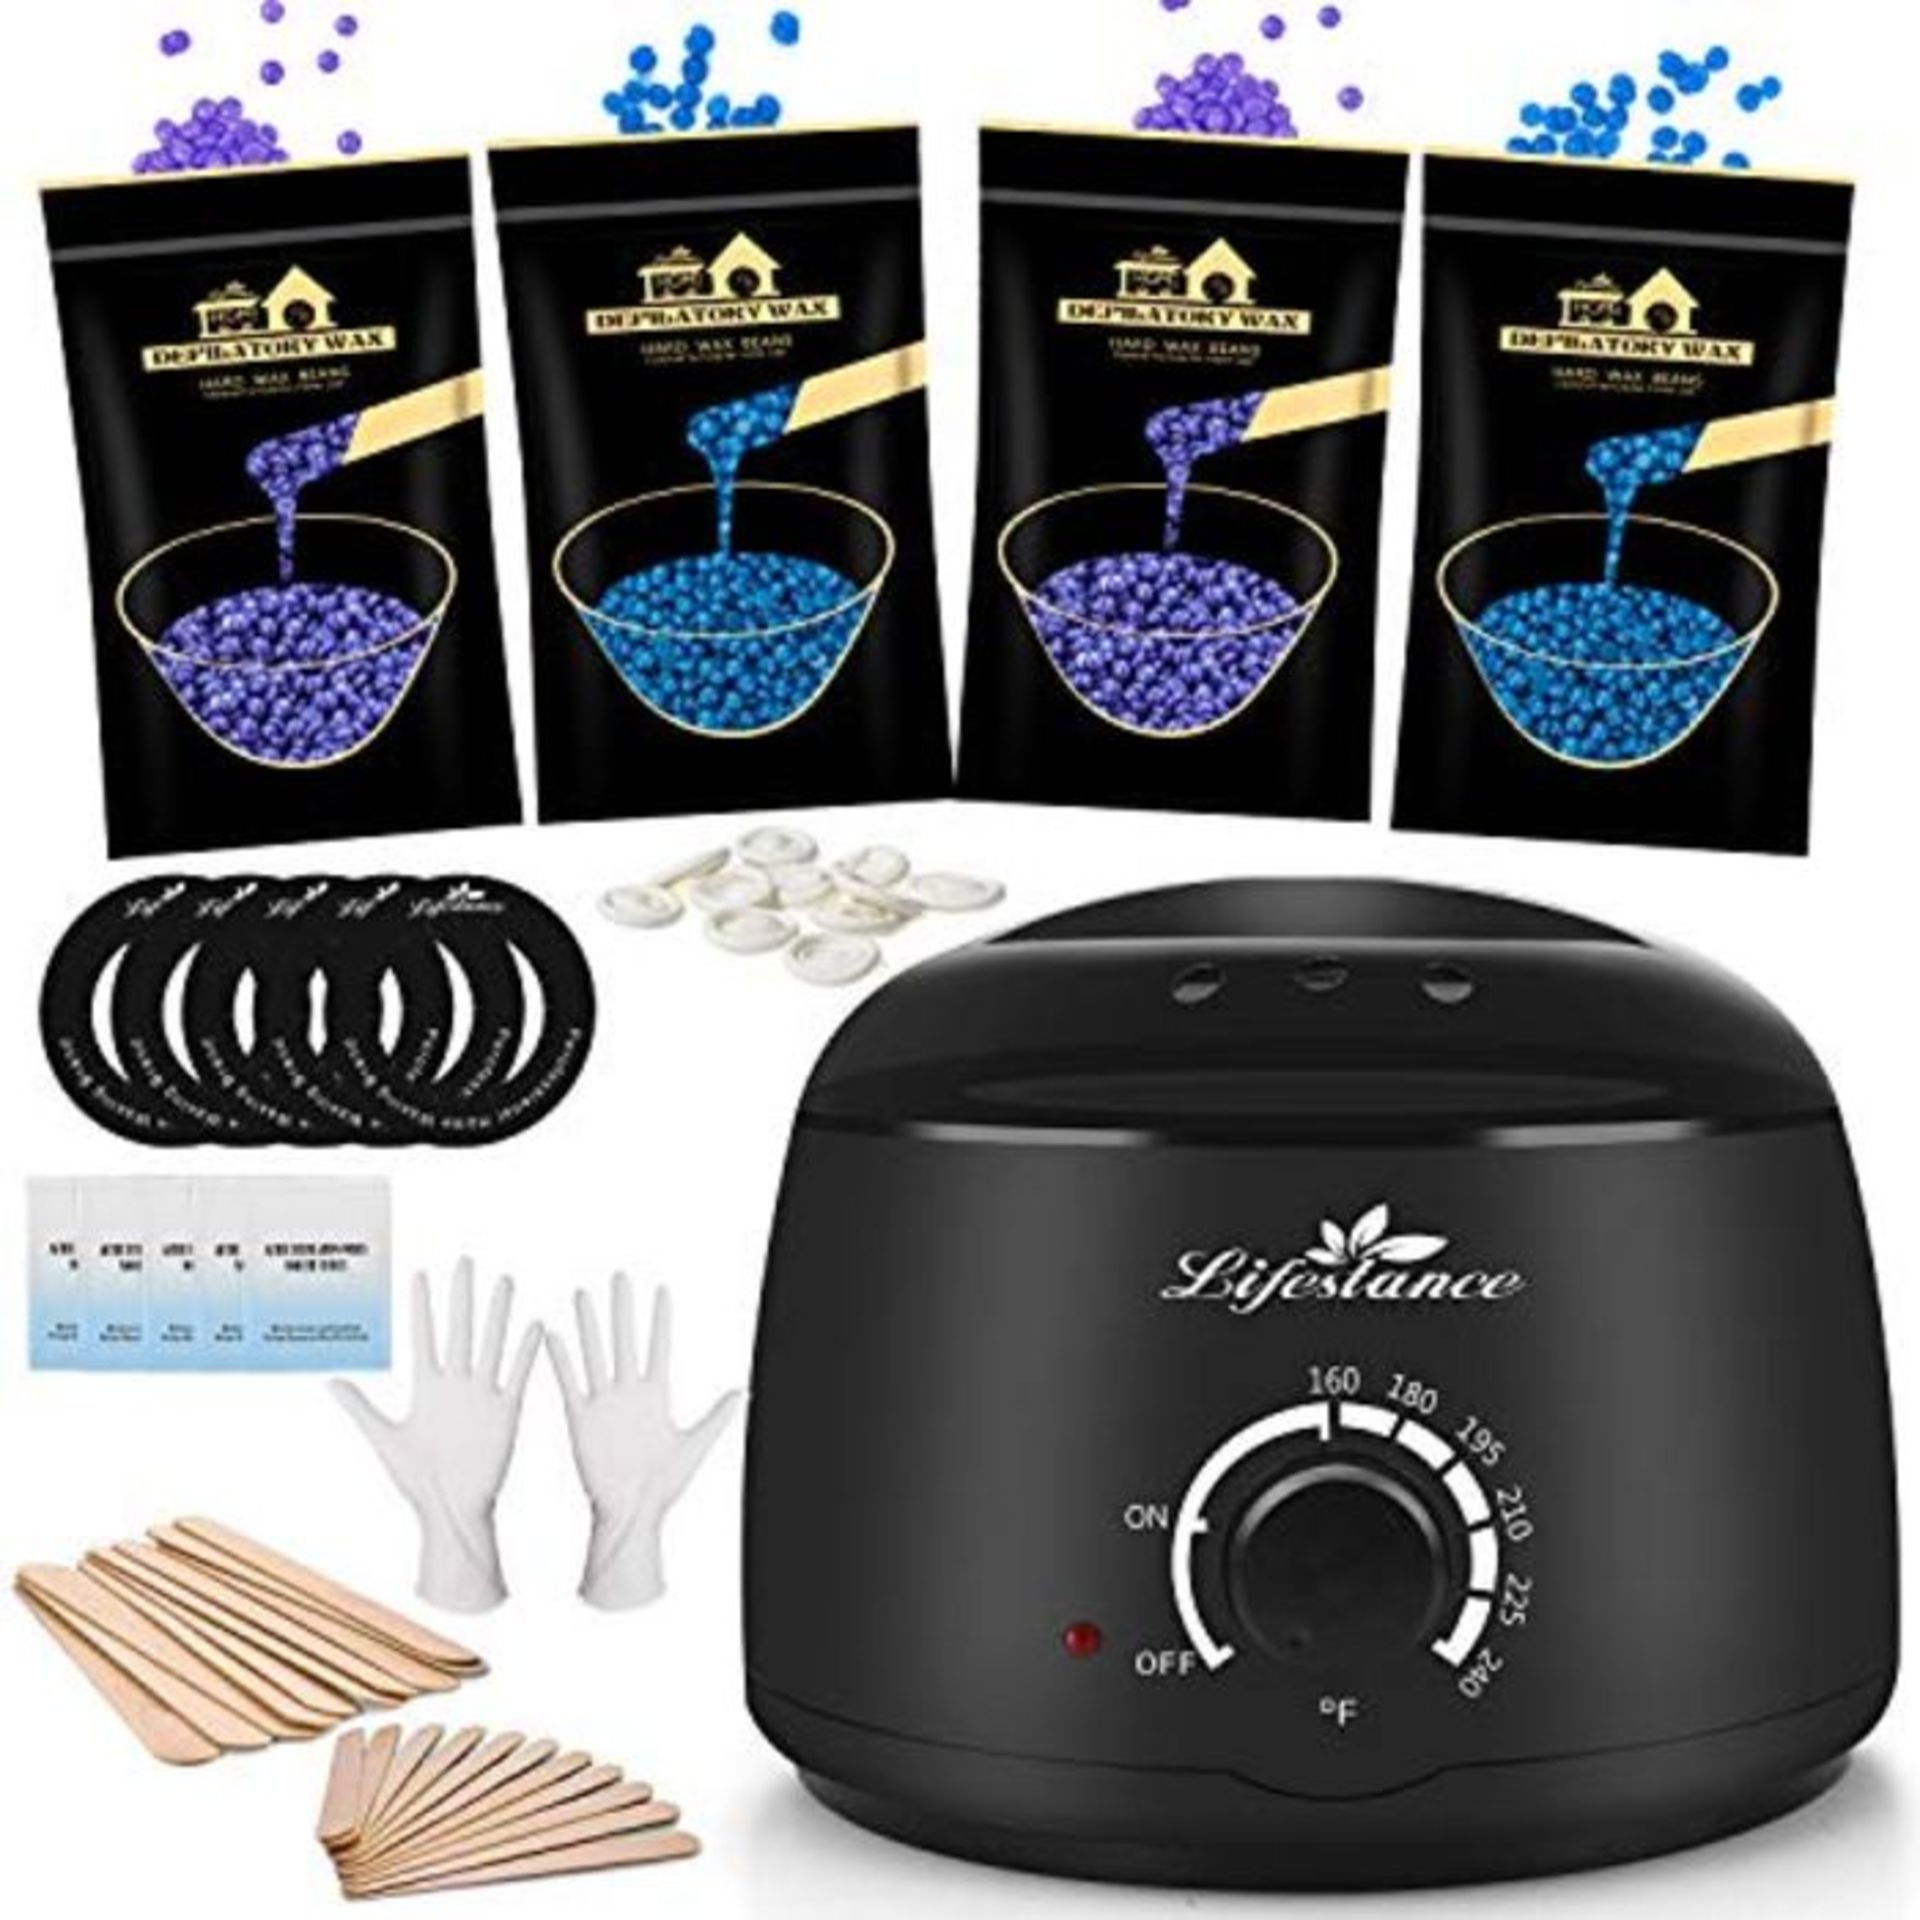 Lifestance Waxing Kit, Wax Warmer Hair Removal Kit with 400g Relaxing Lavender Formula